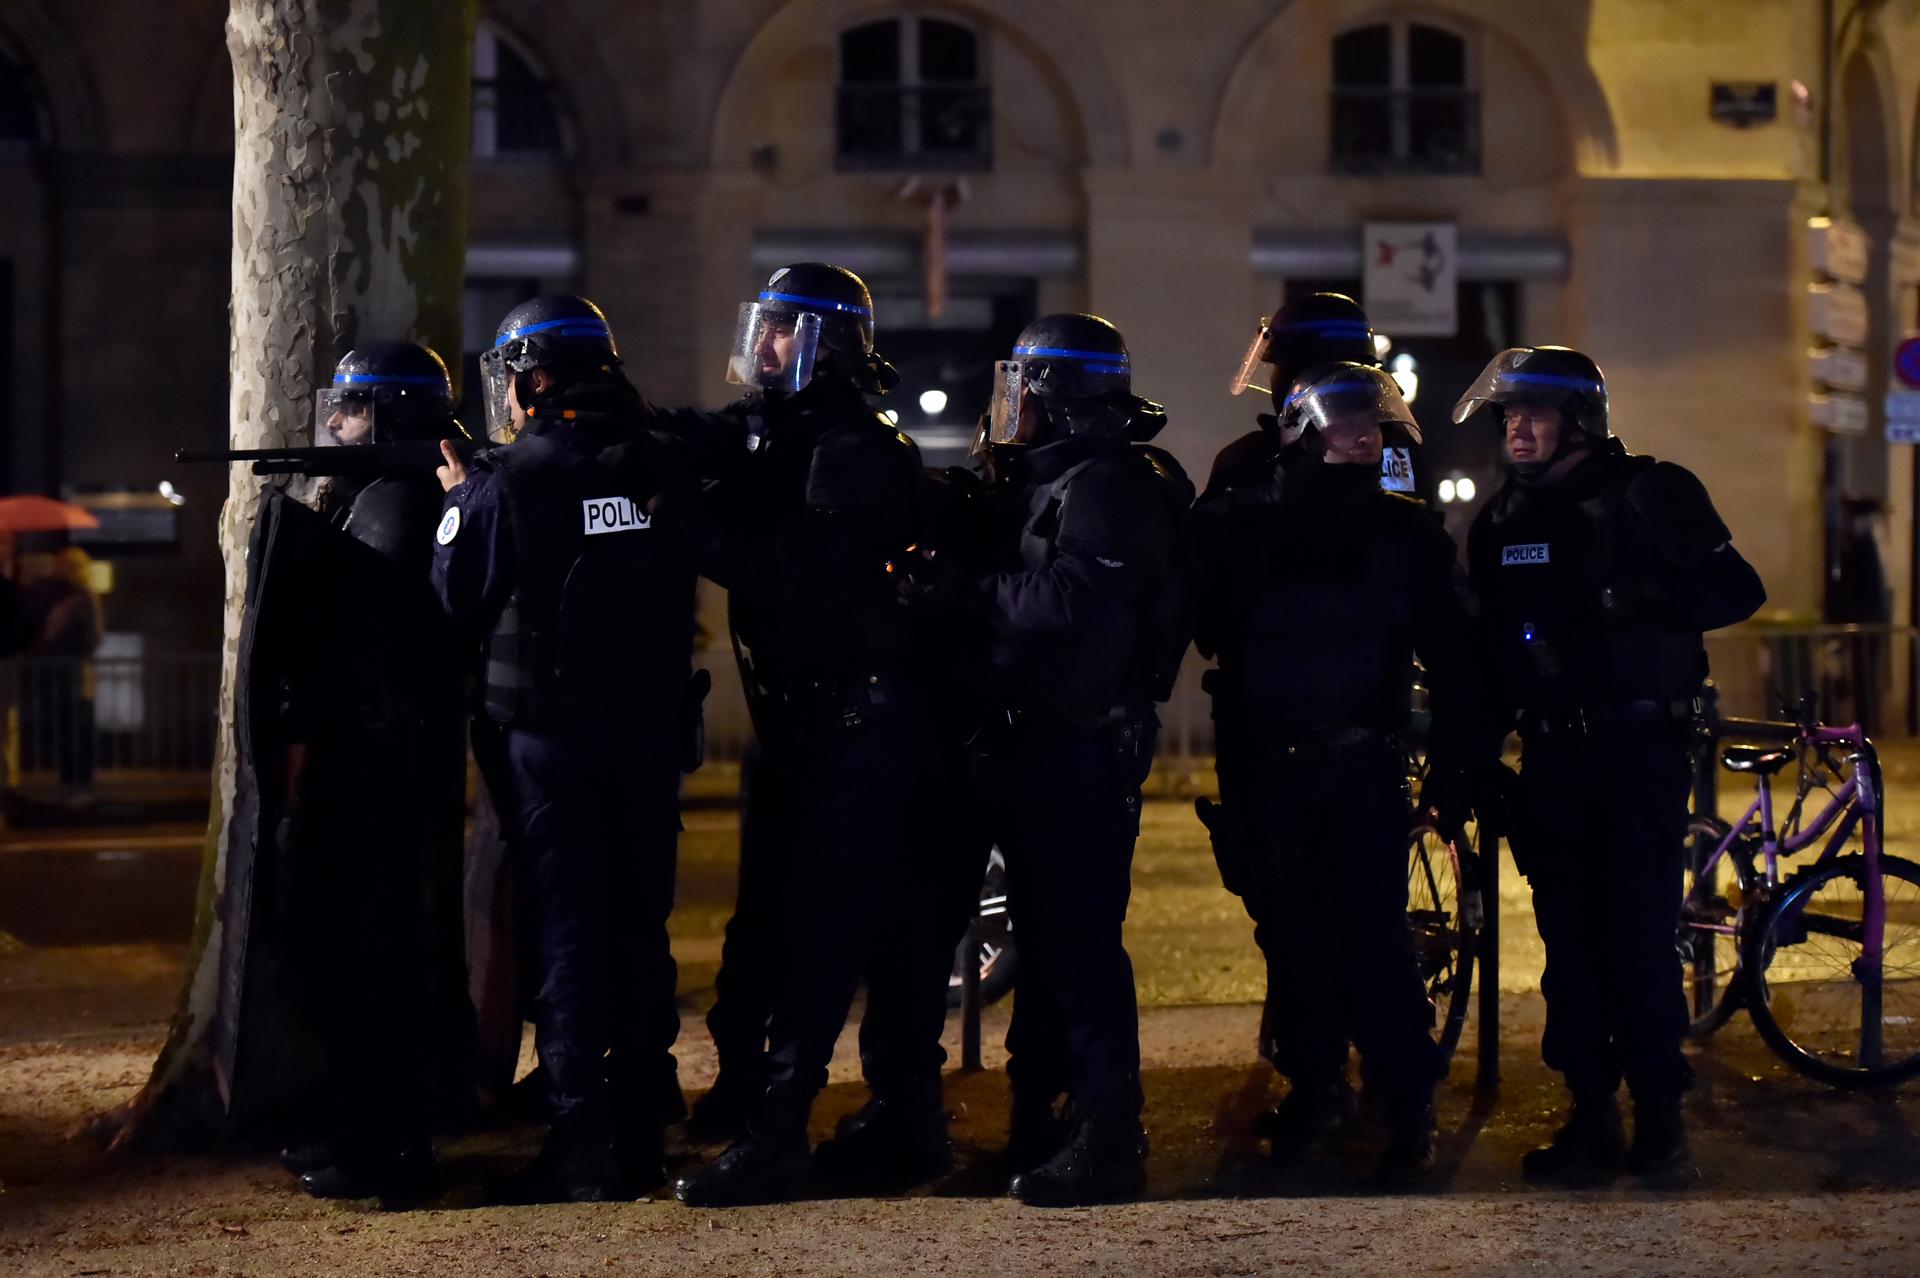 French Police forces take part in a mock terrorist attack drill at a "fan zone" at the Place des Quinconces in Bordeaux, southwestern France, in preparation of security measures for the UEFA 2016 European Championship, April 4, 2016.